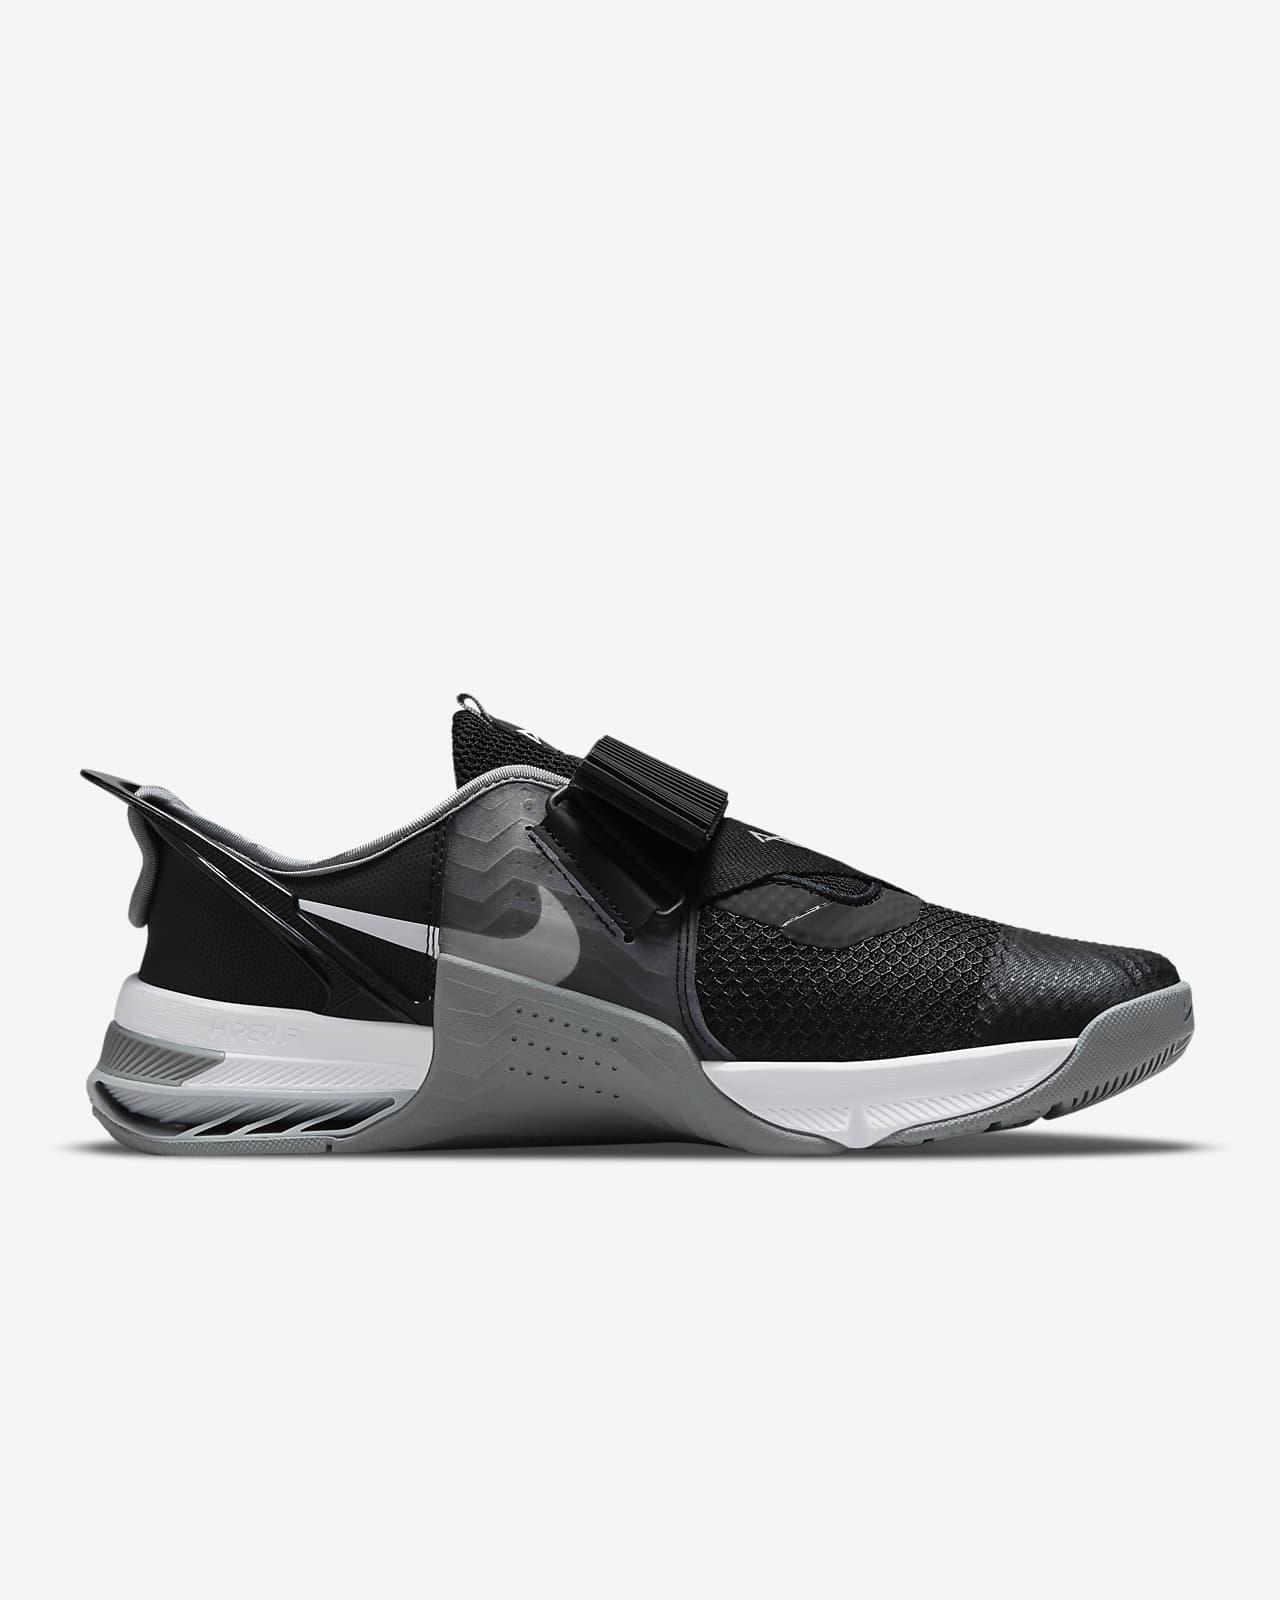 Nike Metcon 7 FlyEase Training Shoes